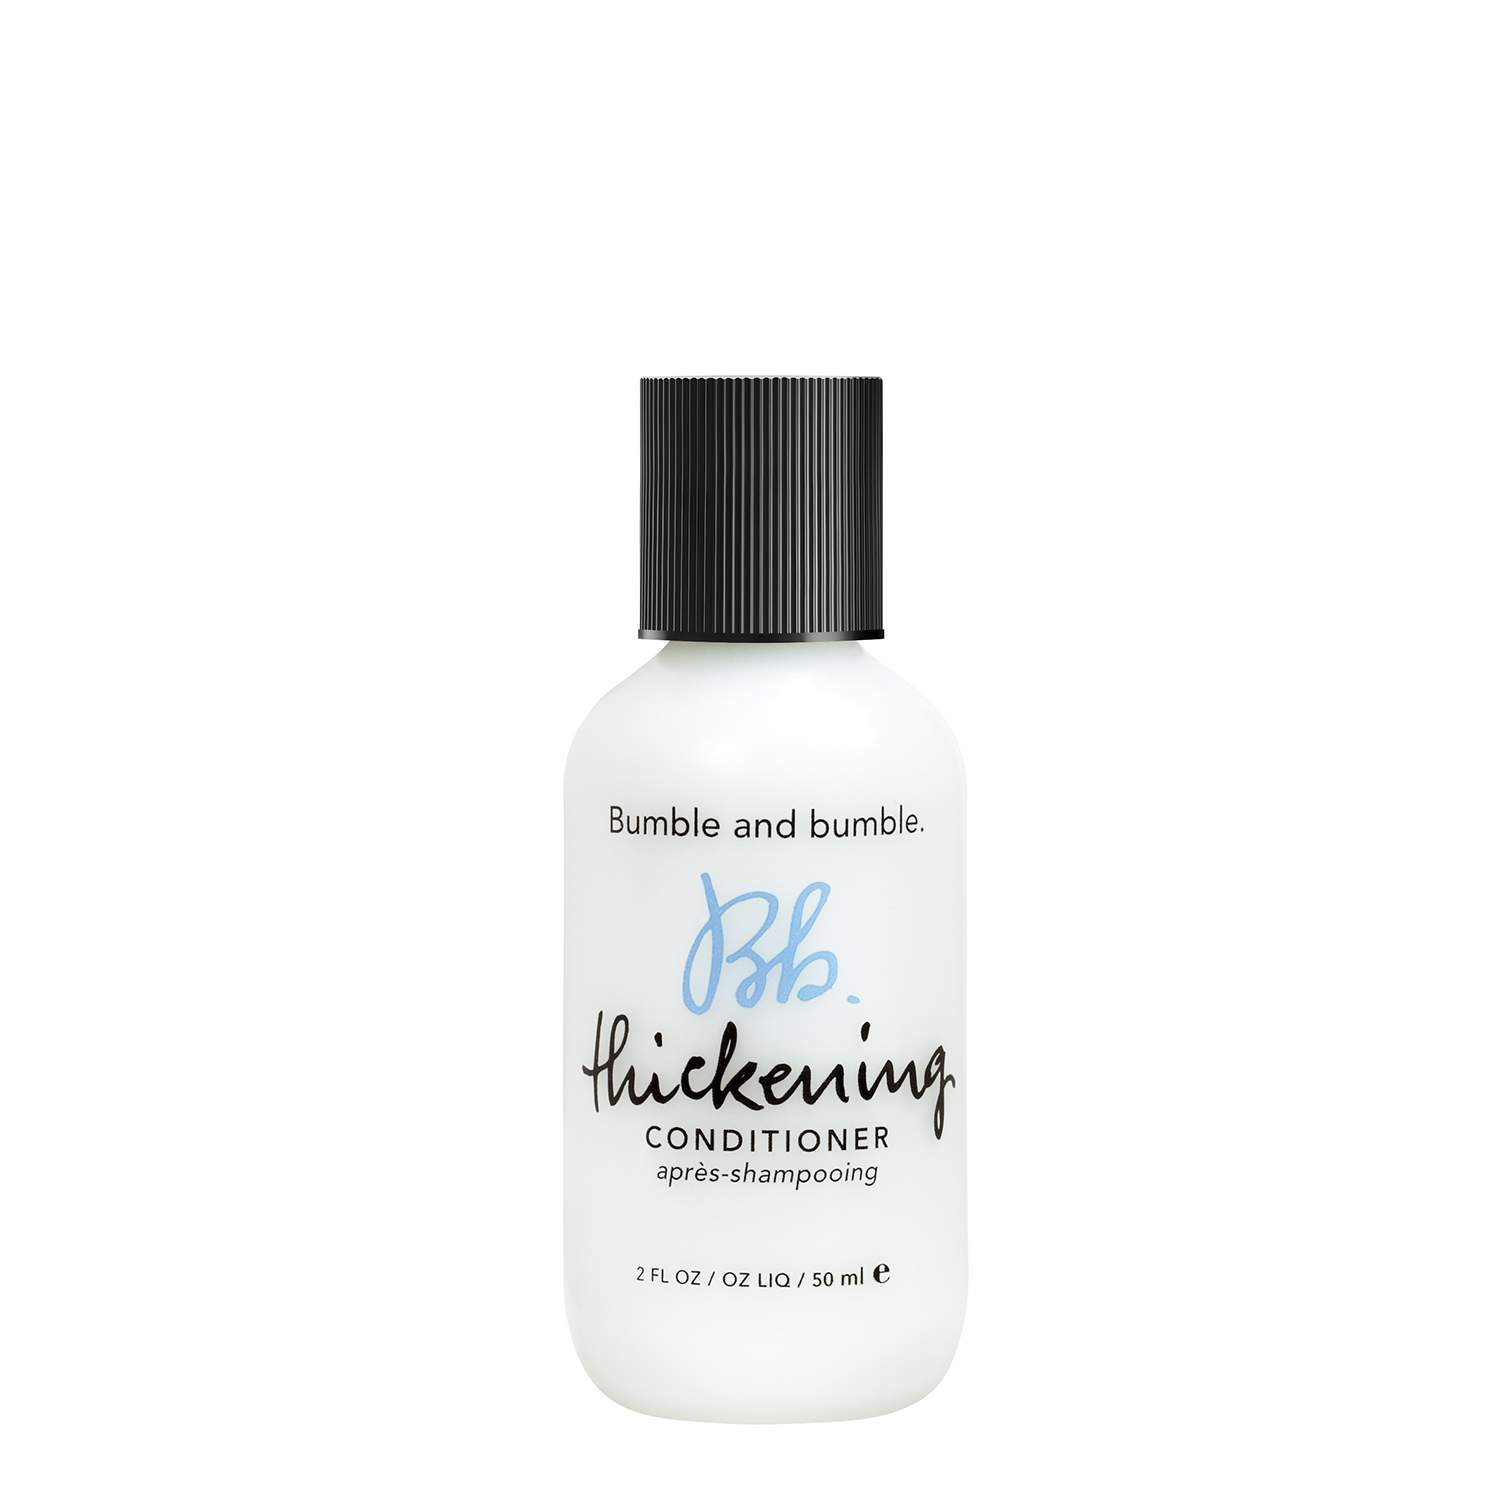 Bumble and bumble. Thickening Conditioner - Travel Size  1